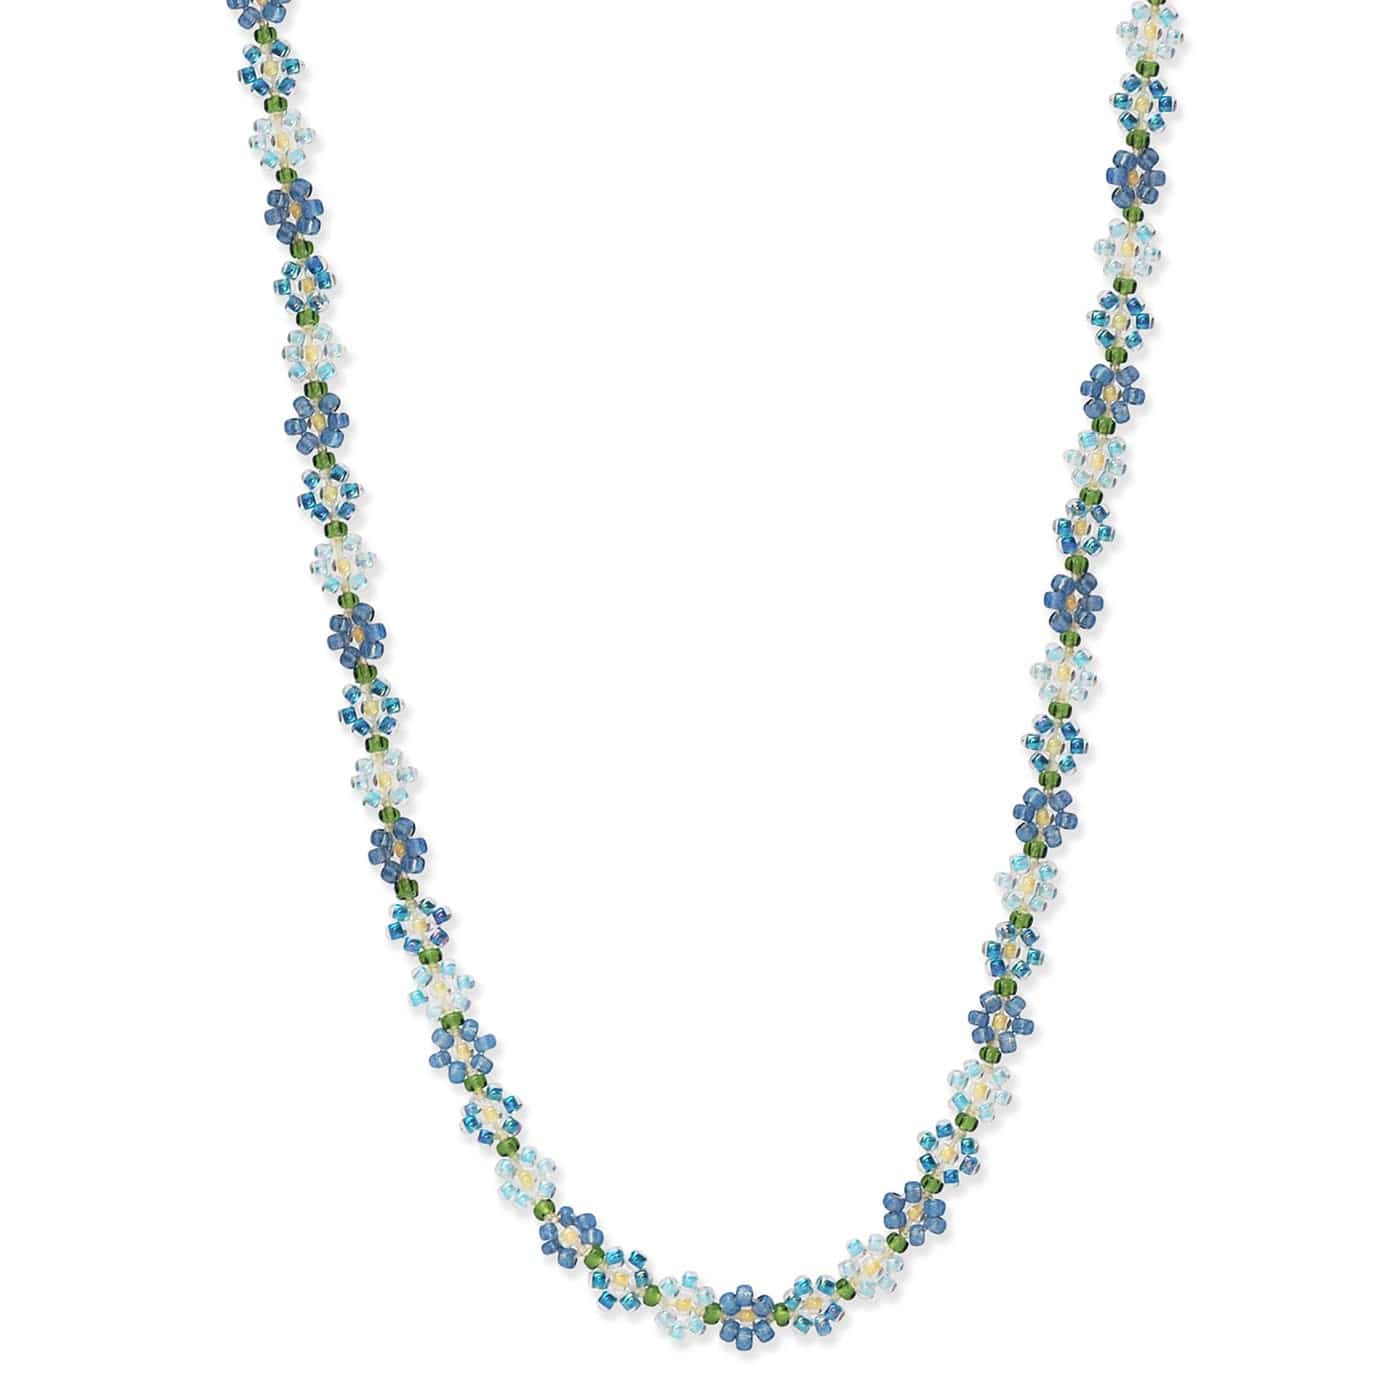 TAI JEWELRY Necklace Blue Handmade Seed Bead Floral Necklace